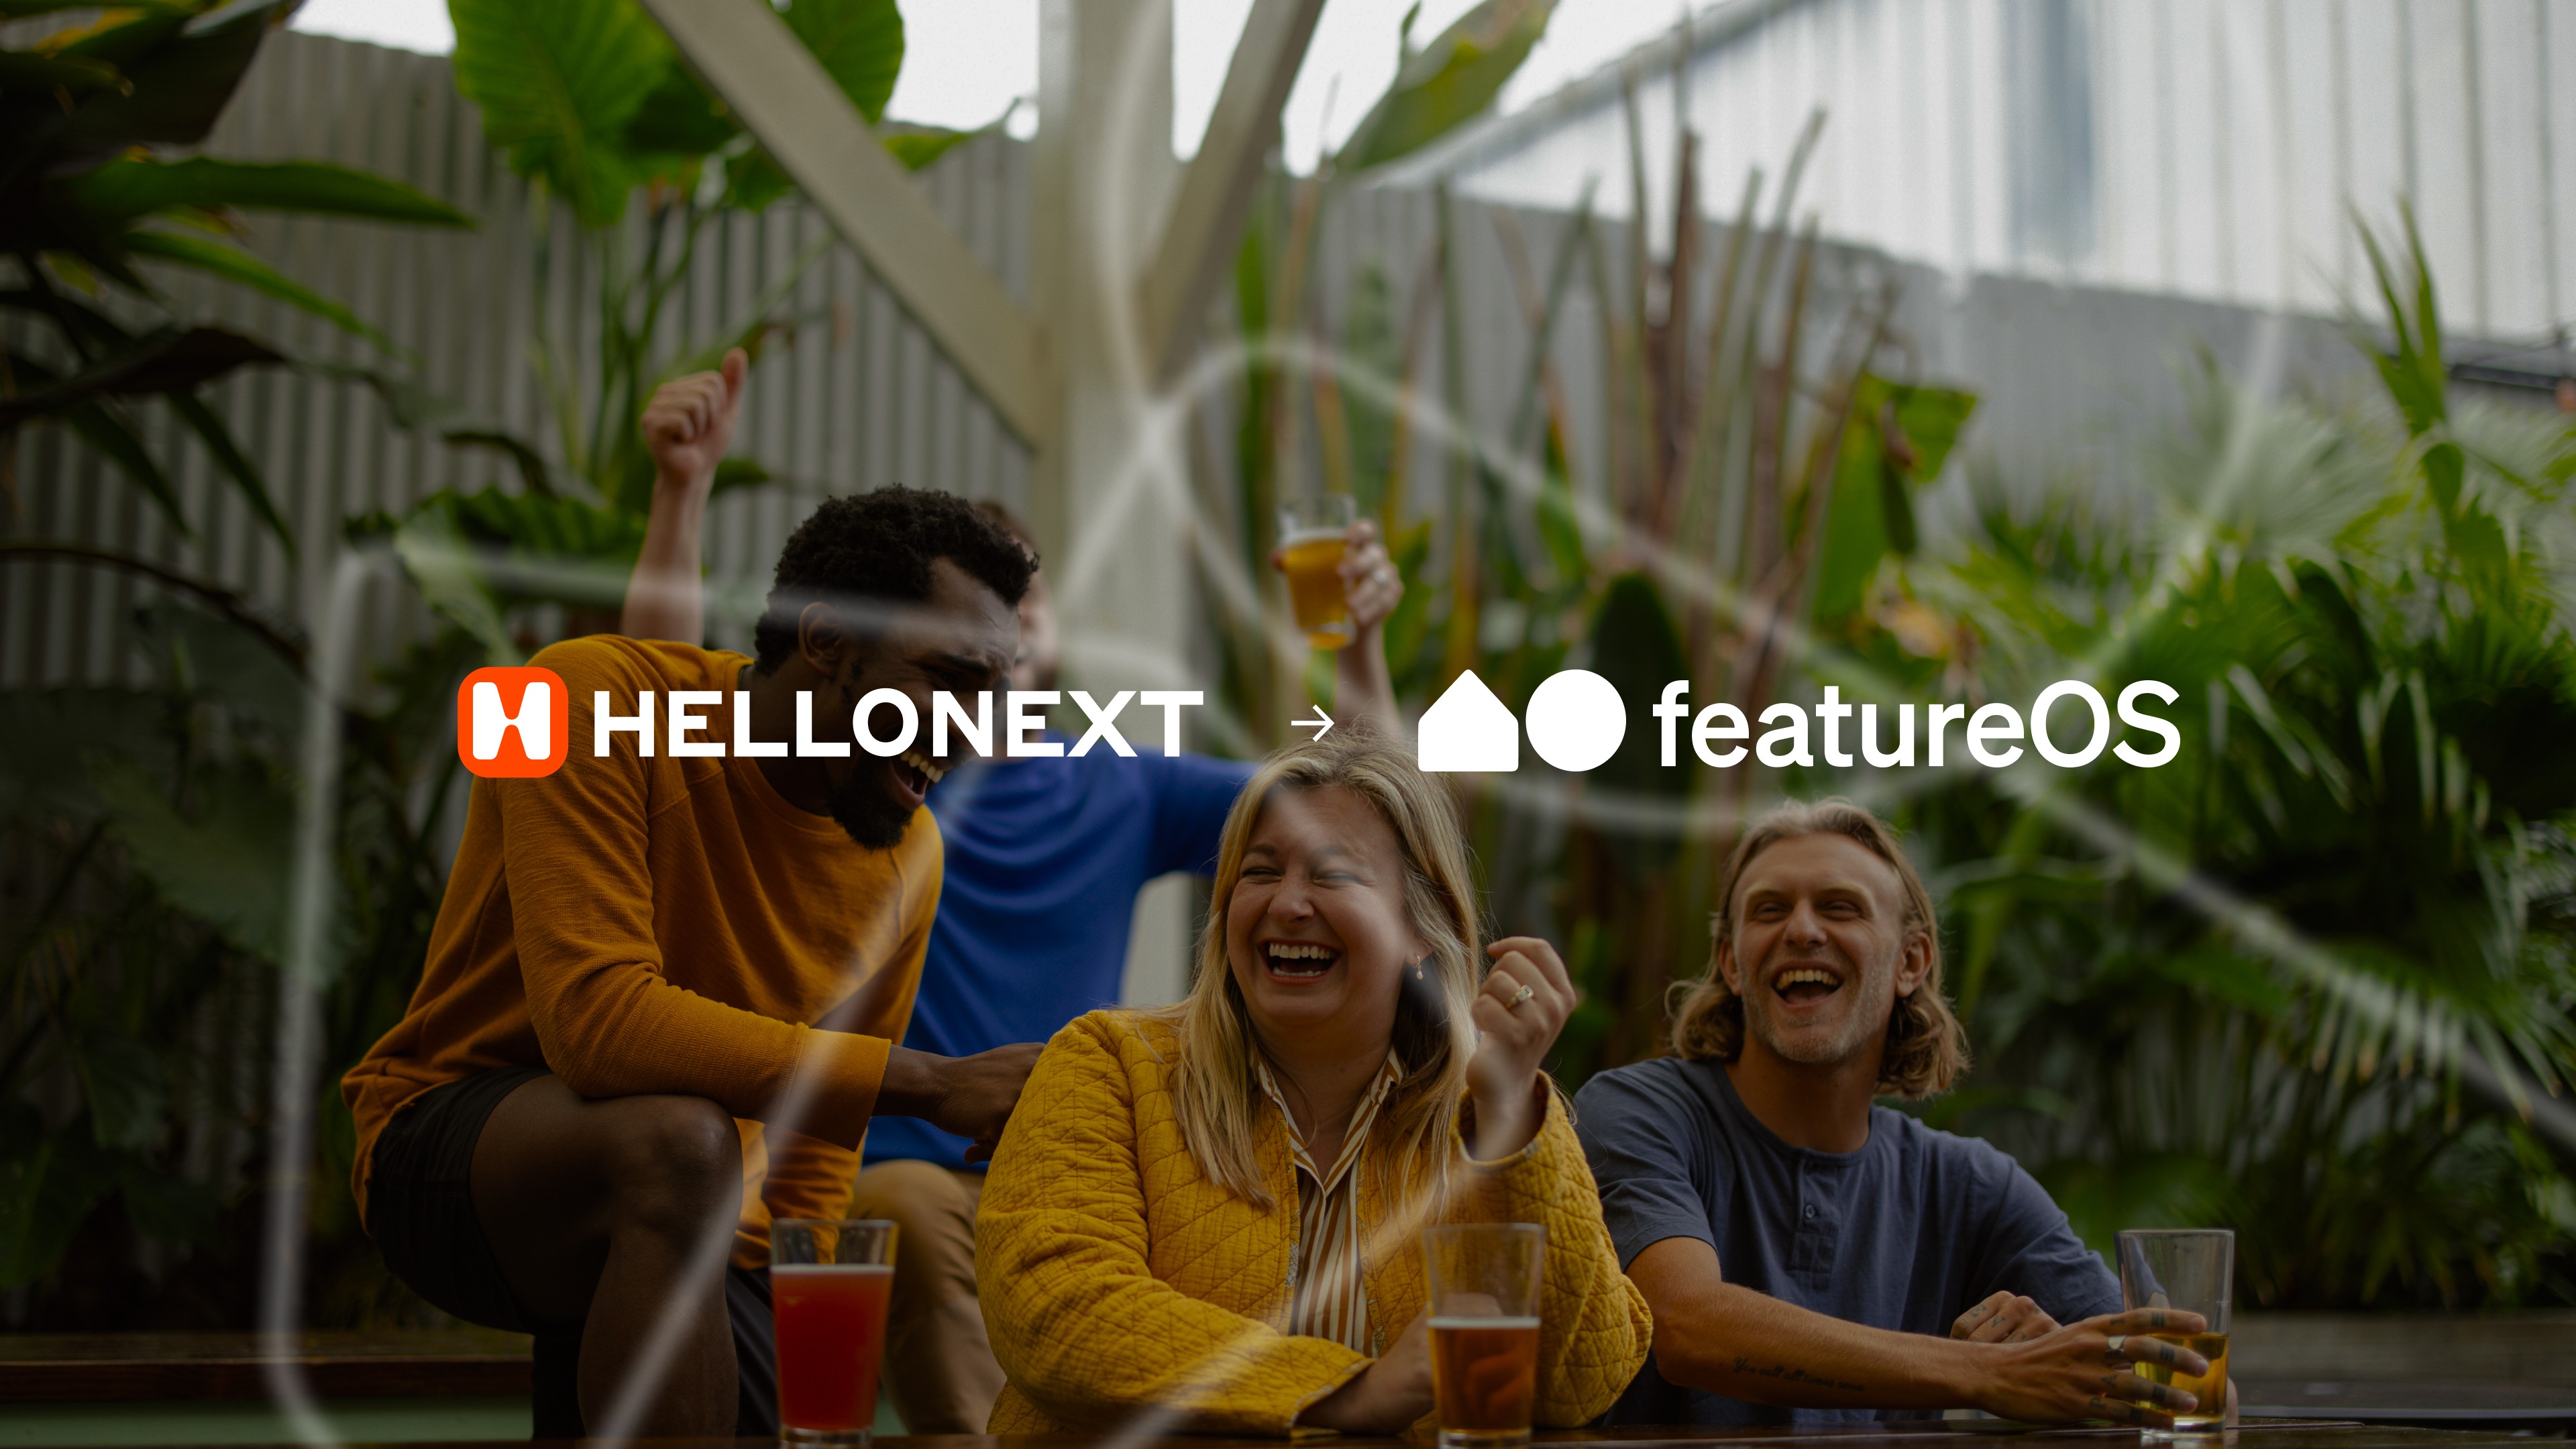 Hellonext is now featureOS